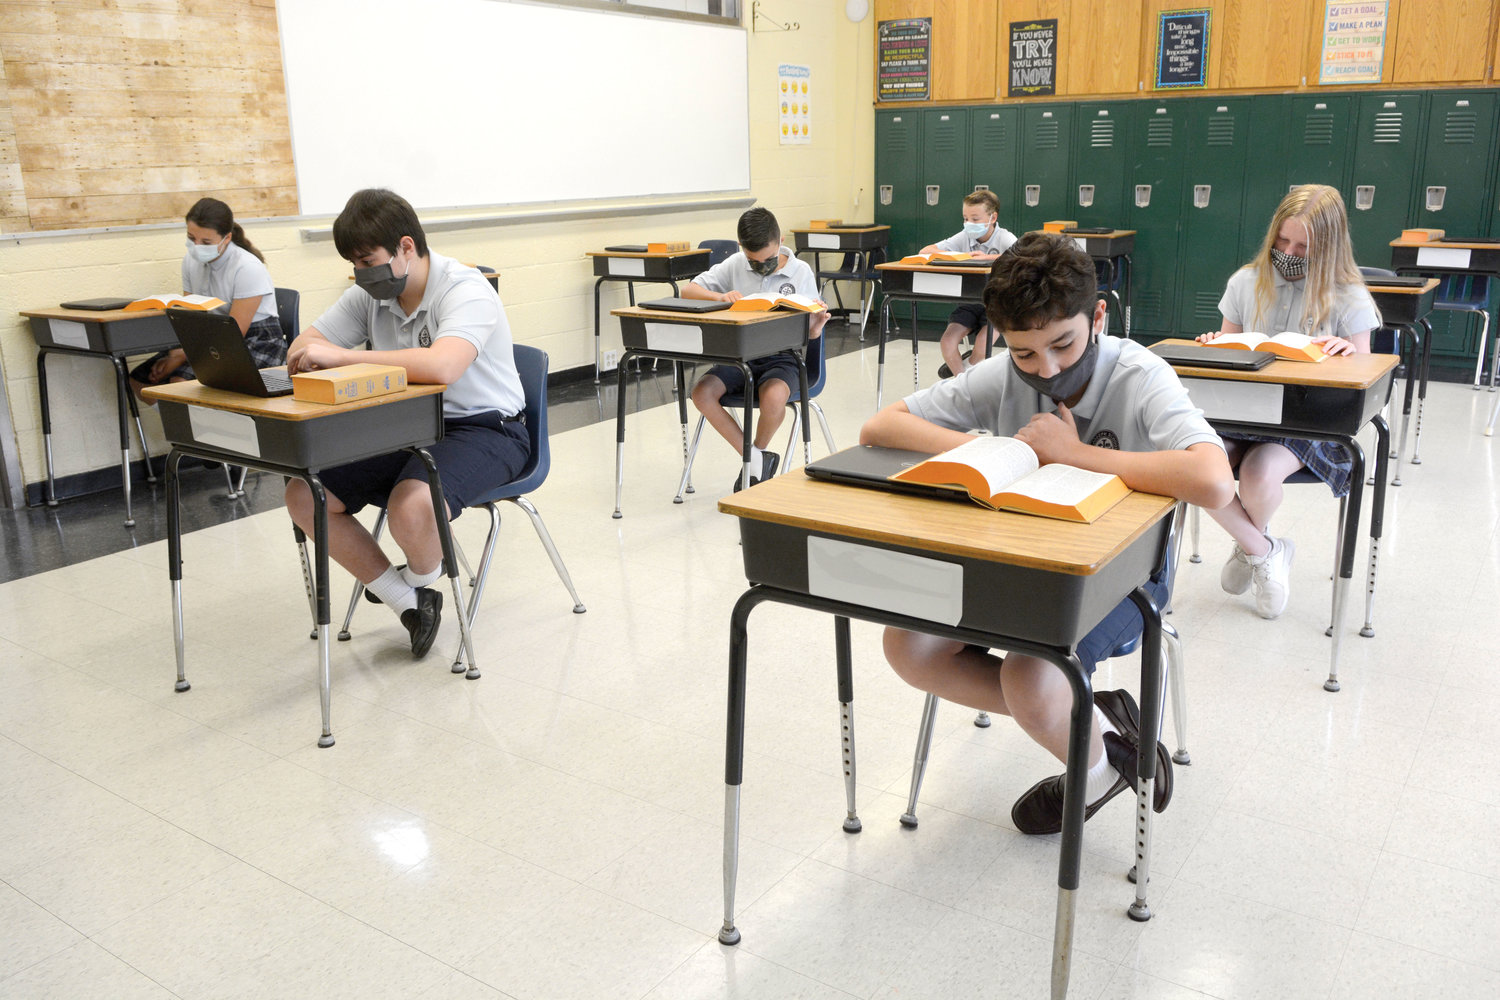 Some sixth-, seventh- and eighth-graders of St. Joseph School in Bronxville demonstrate Aug. 7 what a typical day inside a classroom will look like, with coronavirus protocols
in place.